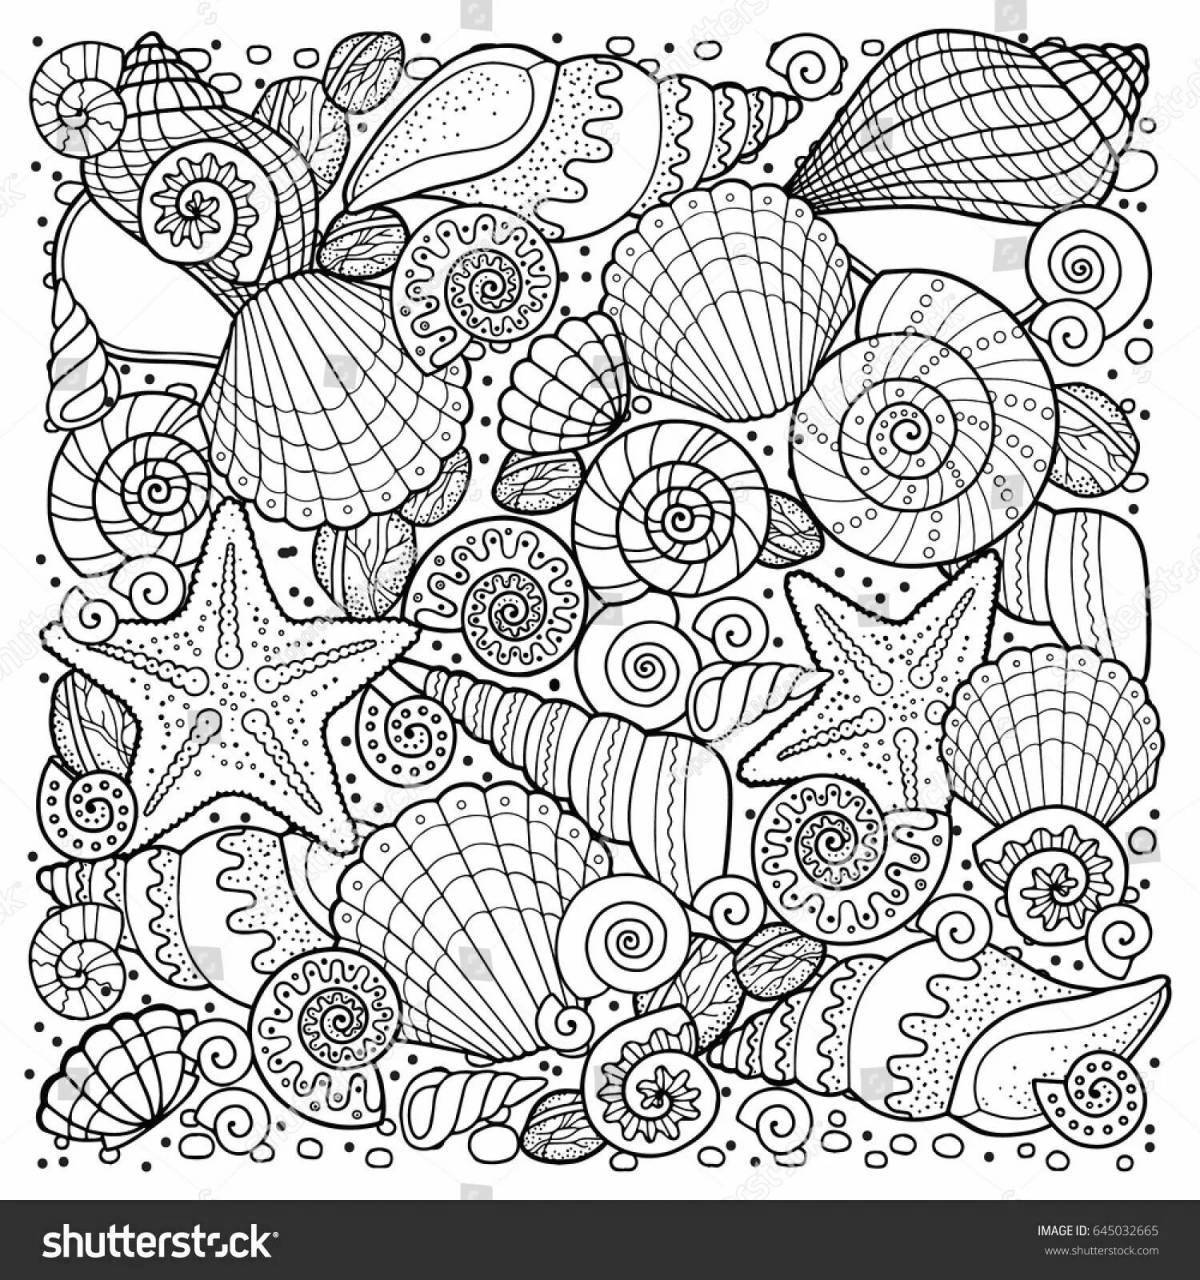 Delightful relaxation coloring book